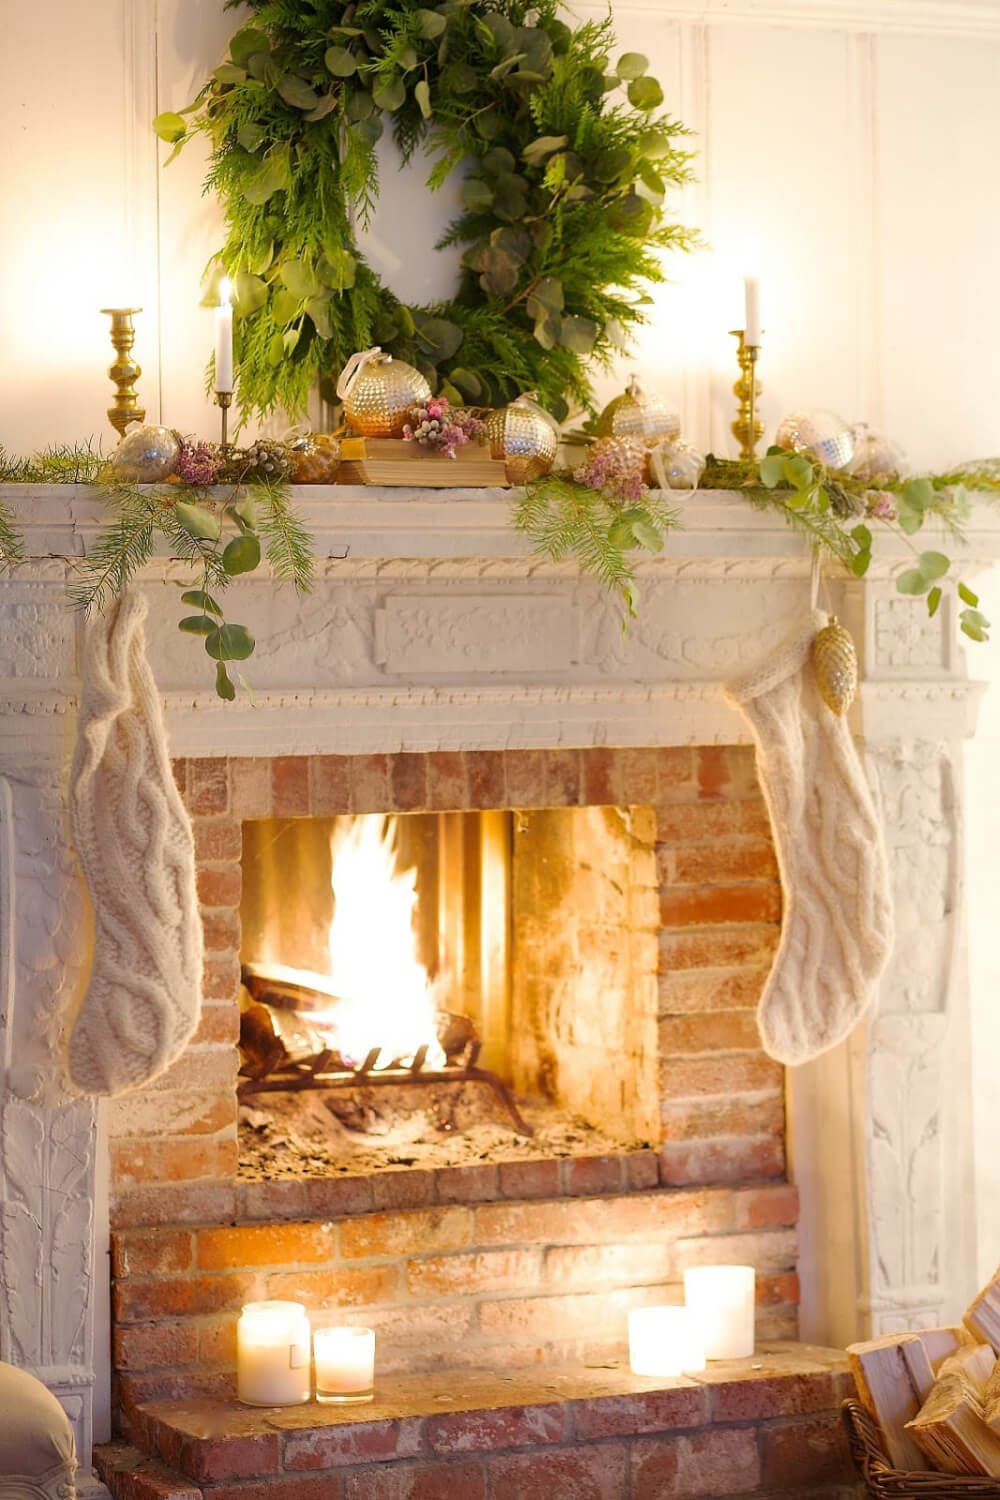 In The Love Of Home Files #6, a cozy scene with fireplace